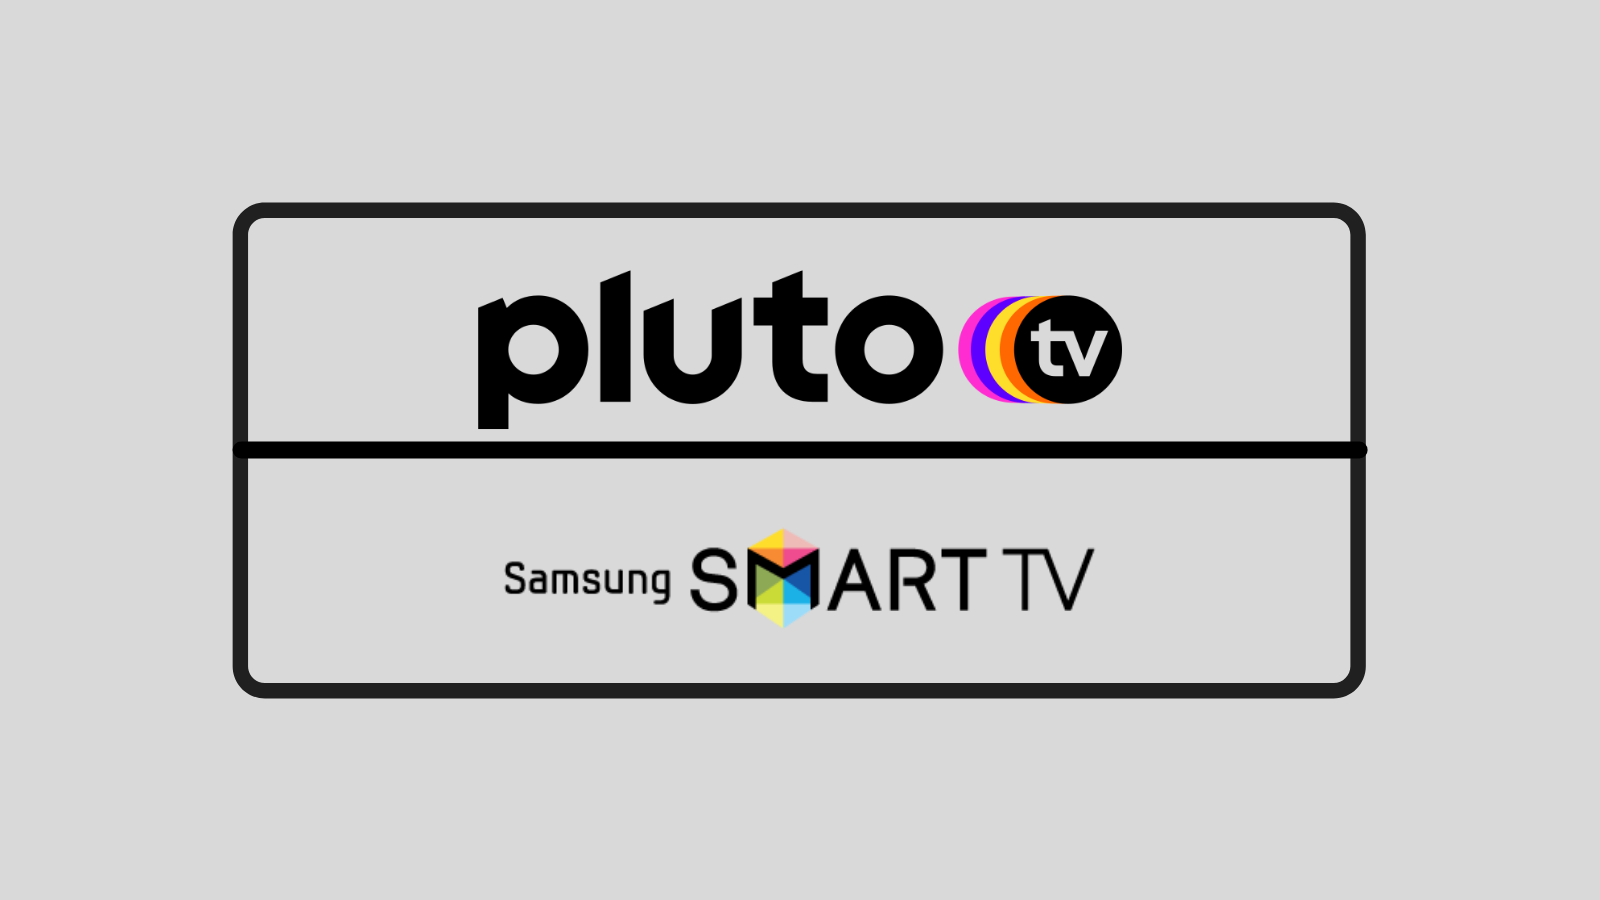 How To Get Pluto Tv On Samsung Smart Tv In 2021 Laptrinhx News